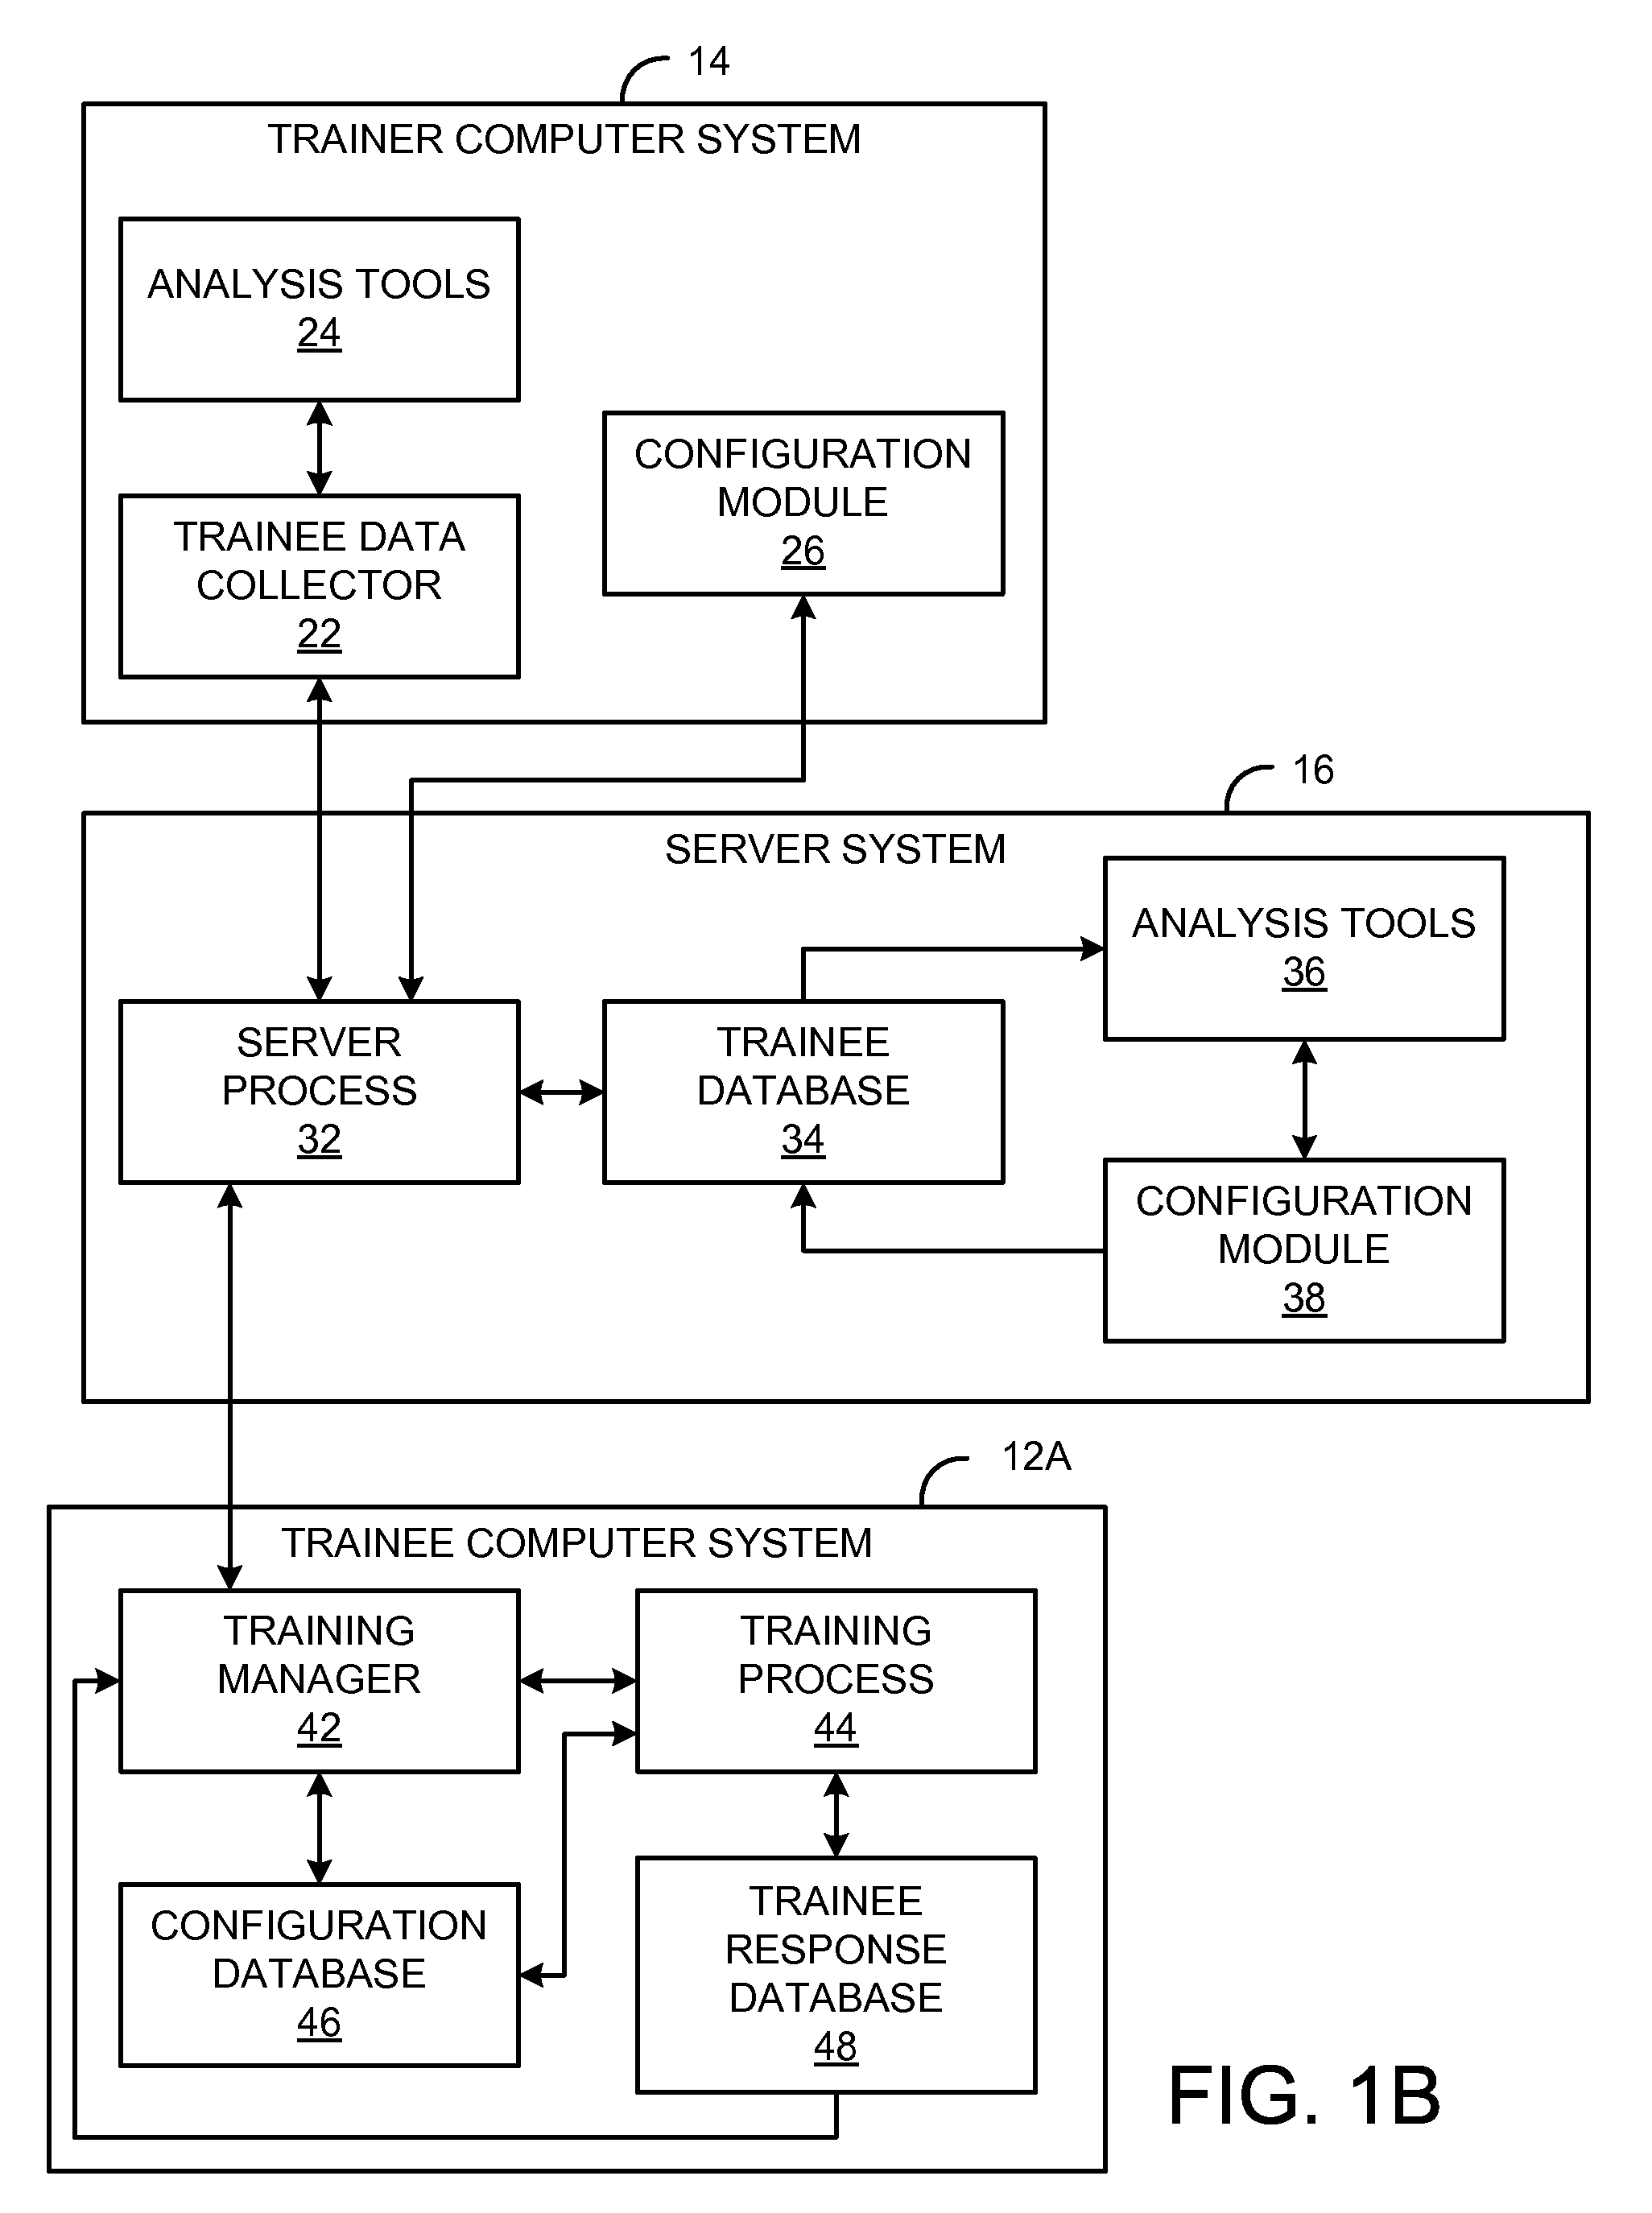 Computerized Systems and Methods for Self-Awareness and Interpersonal Relationship Skill Training and Development for Improving Organizational Efficiency